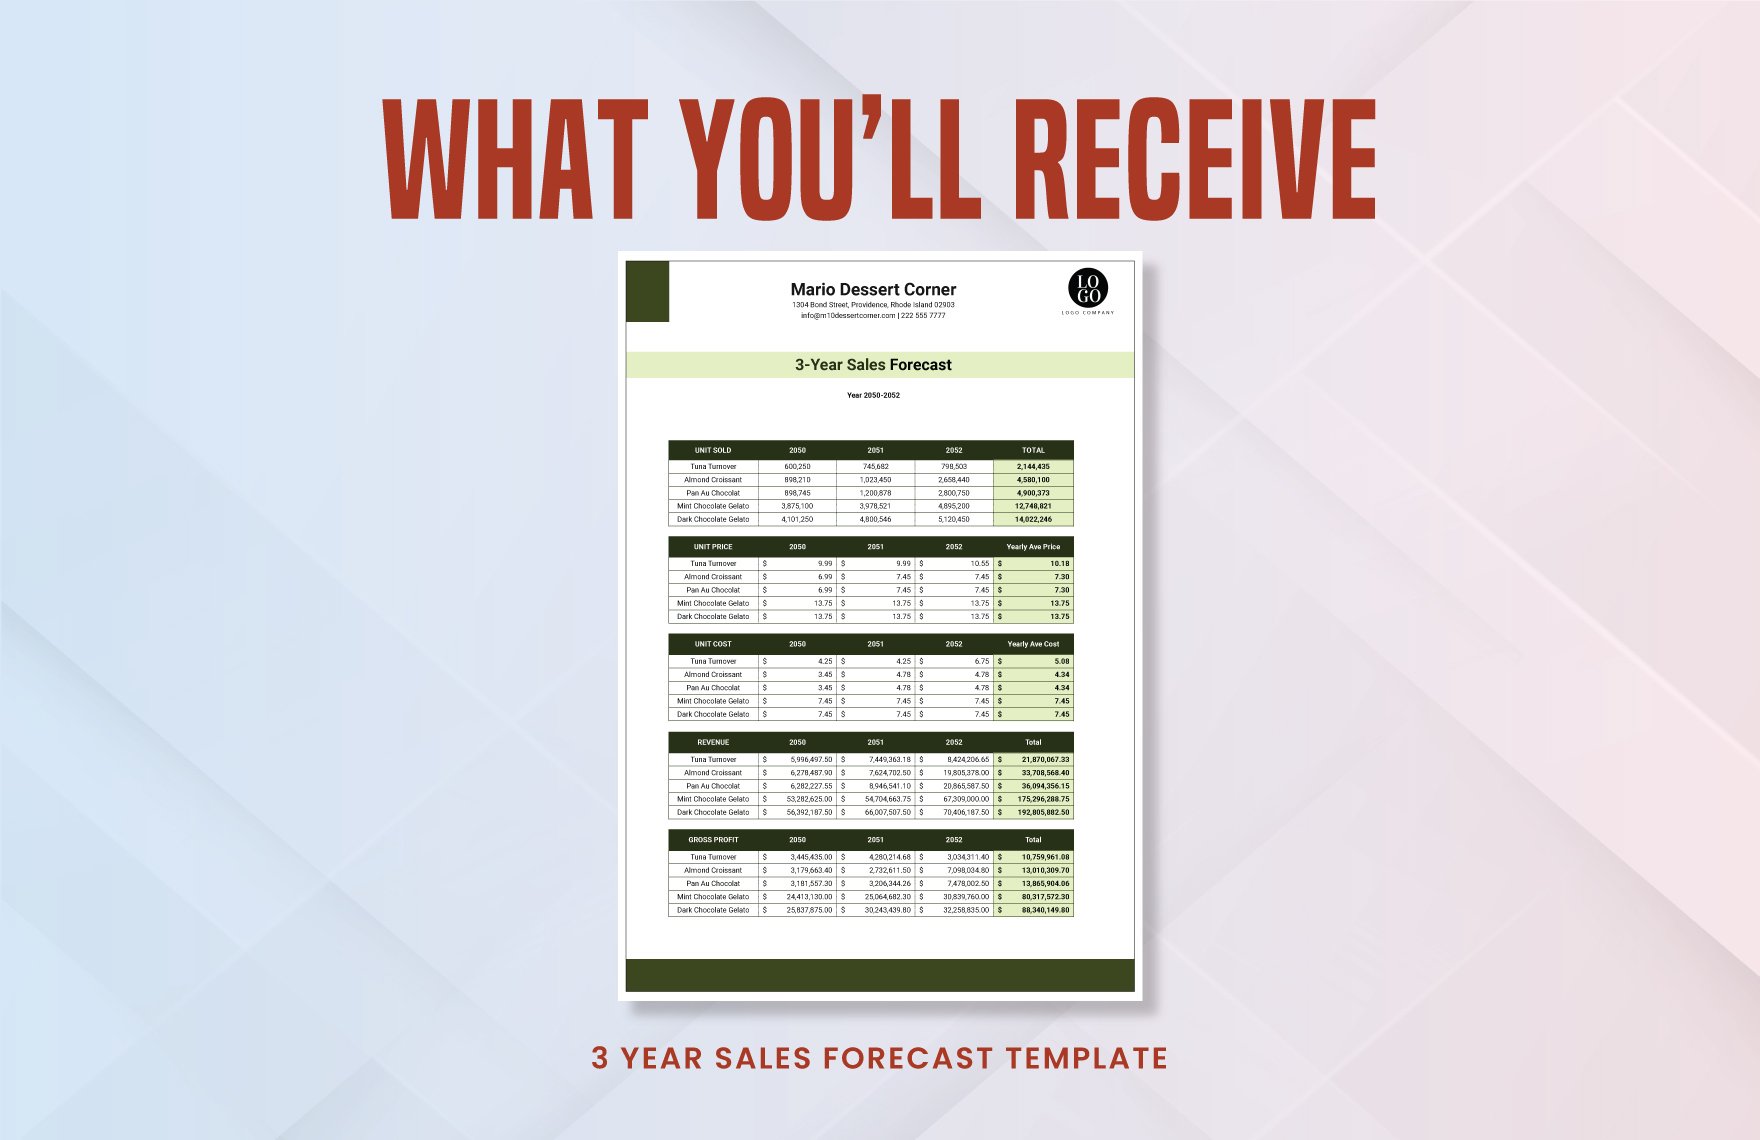 3-year Sales Forecast Template